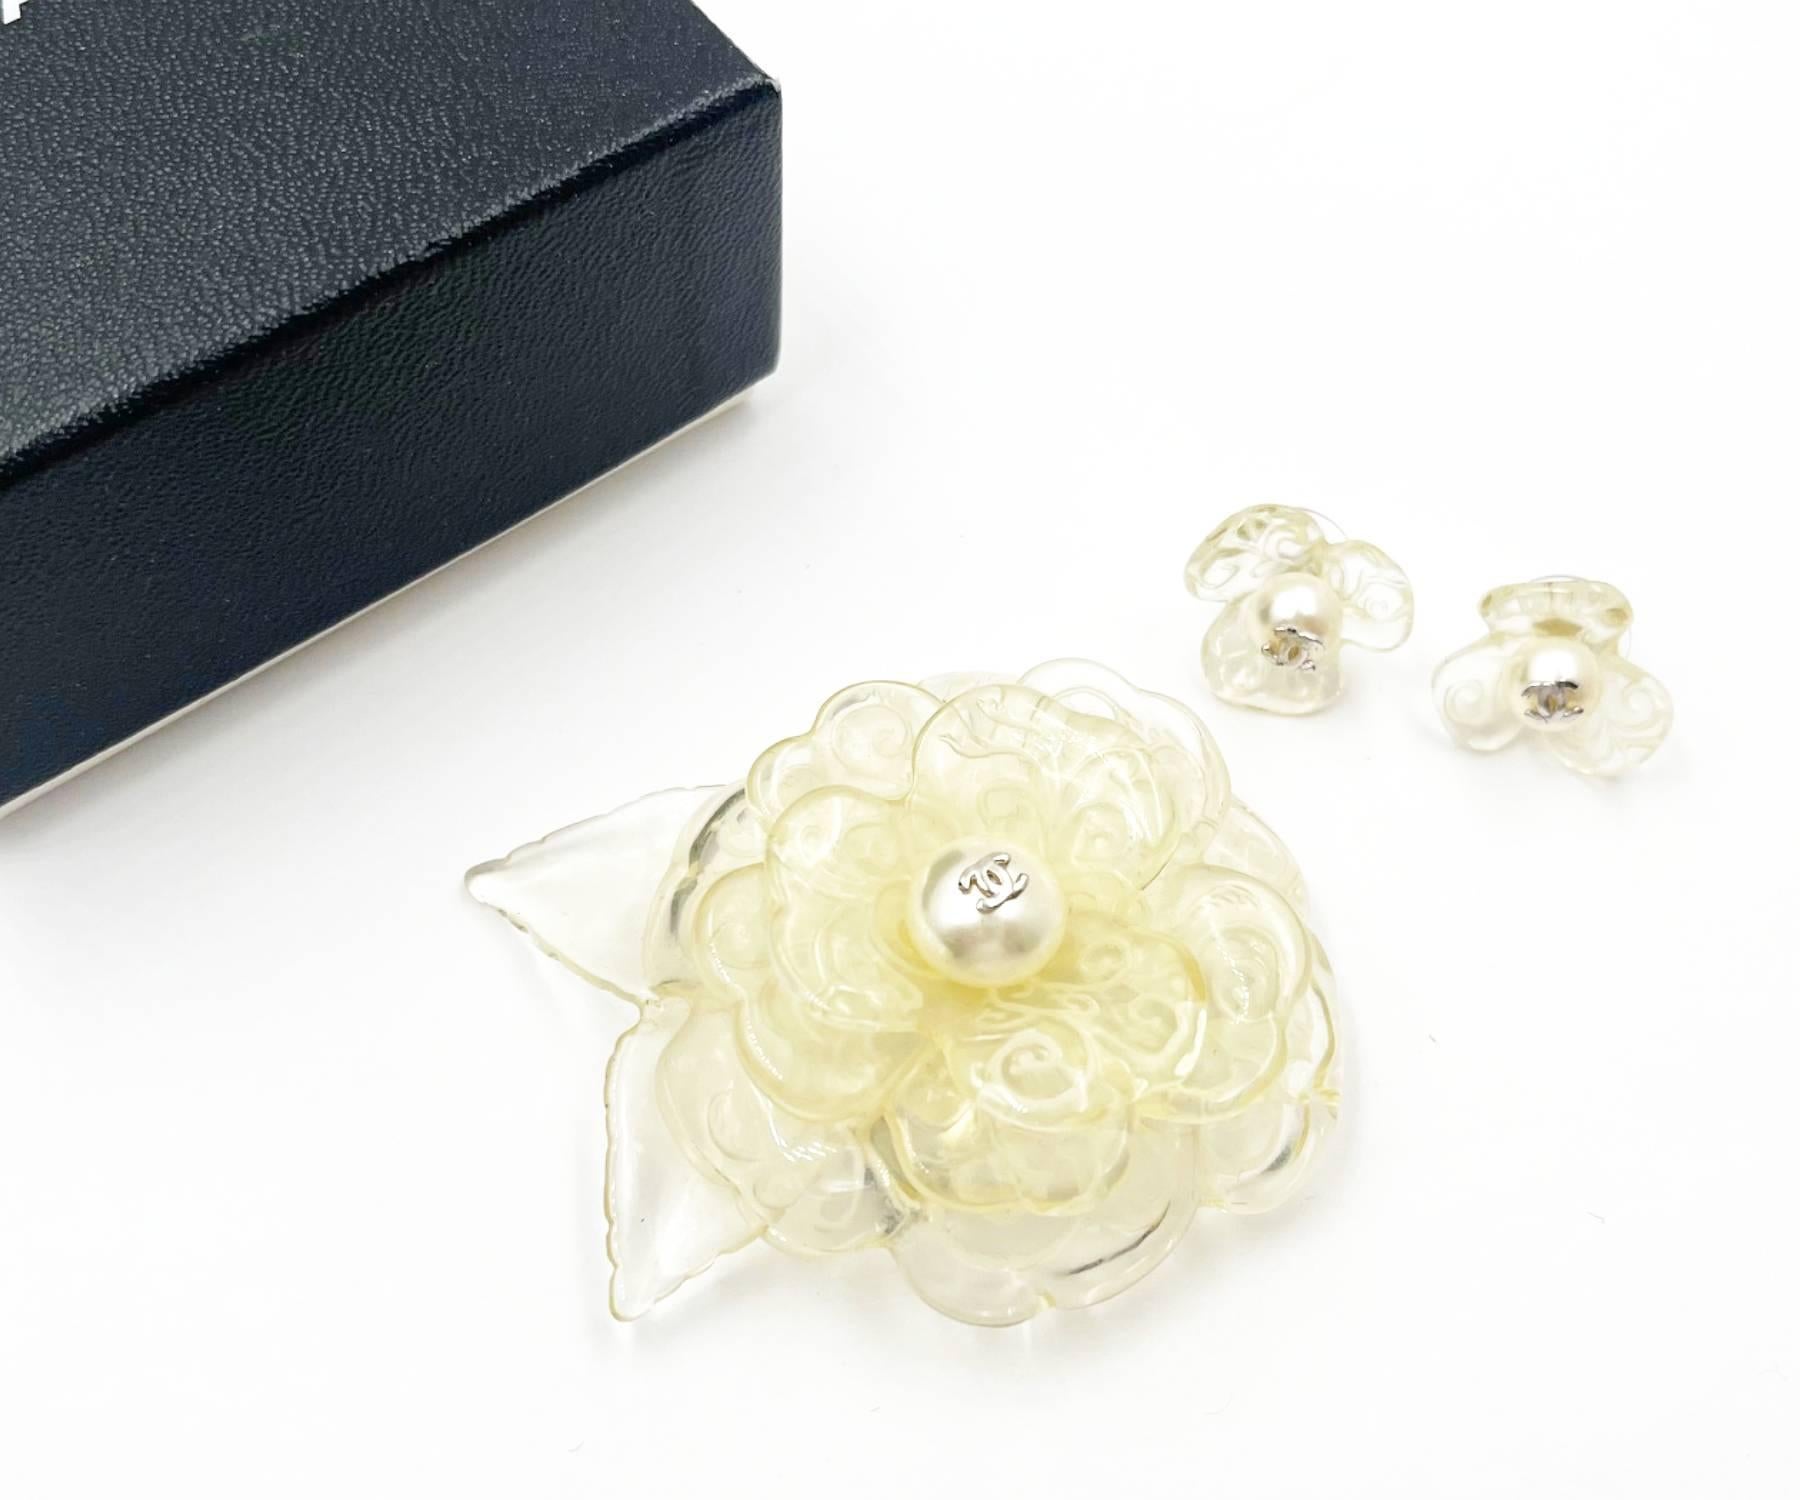 Chanel Ivory Resin Engraving Etching Camellia Flower Brooch

*Marked 03
*Made in France
*Comes with original box

-The brooch is approximately 2.5″ x 2.3″.
-Very cute and classic
-In a pristine condition.
-The earrings are for pictures